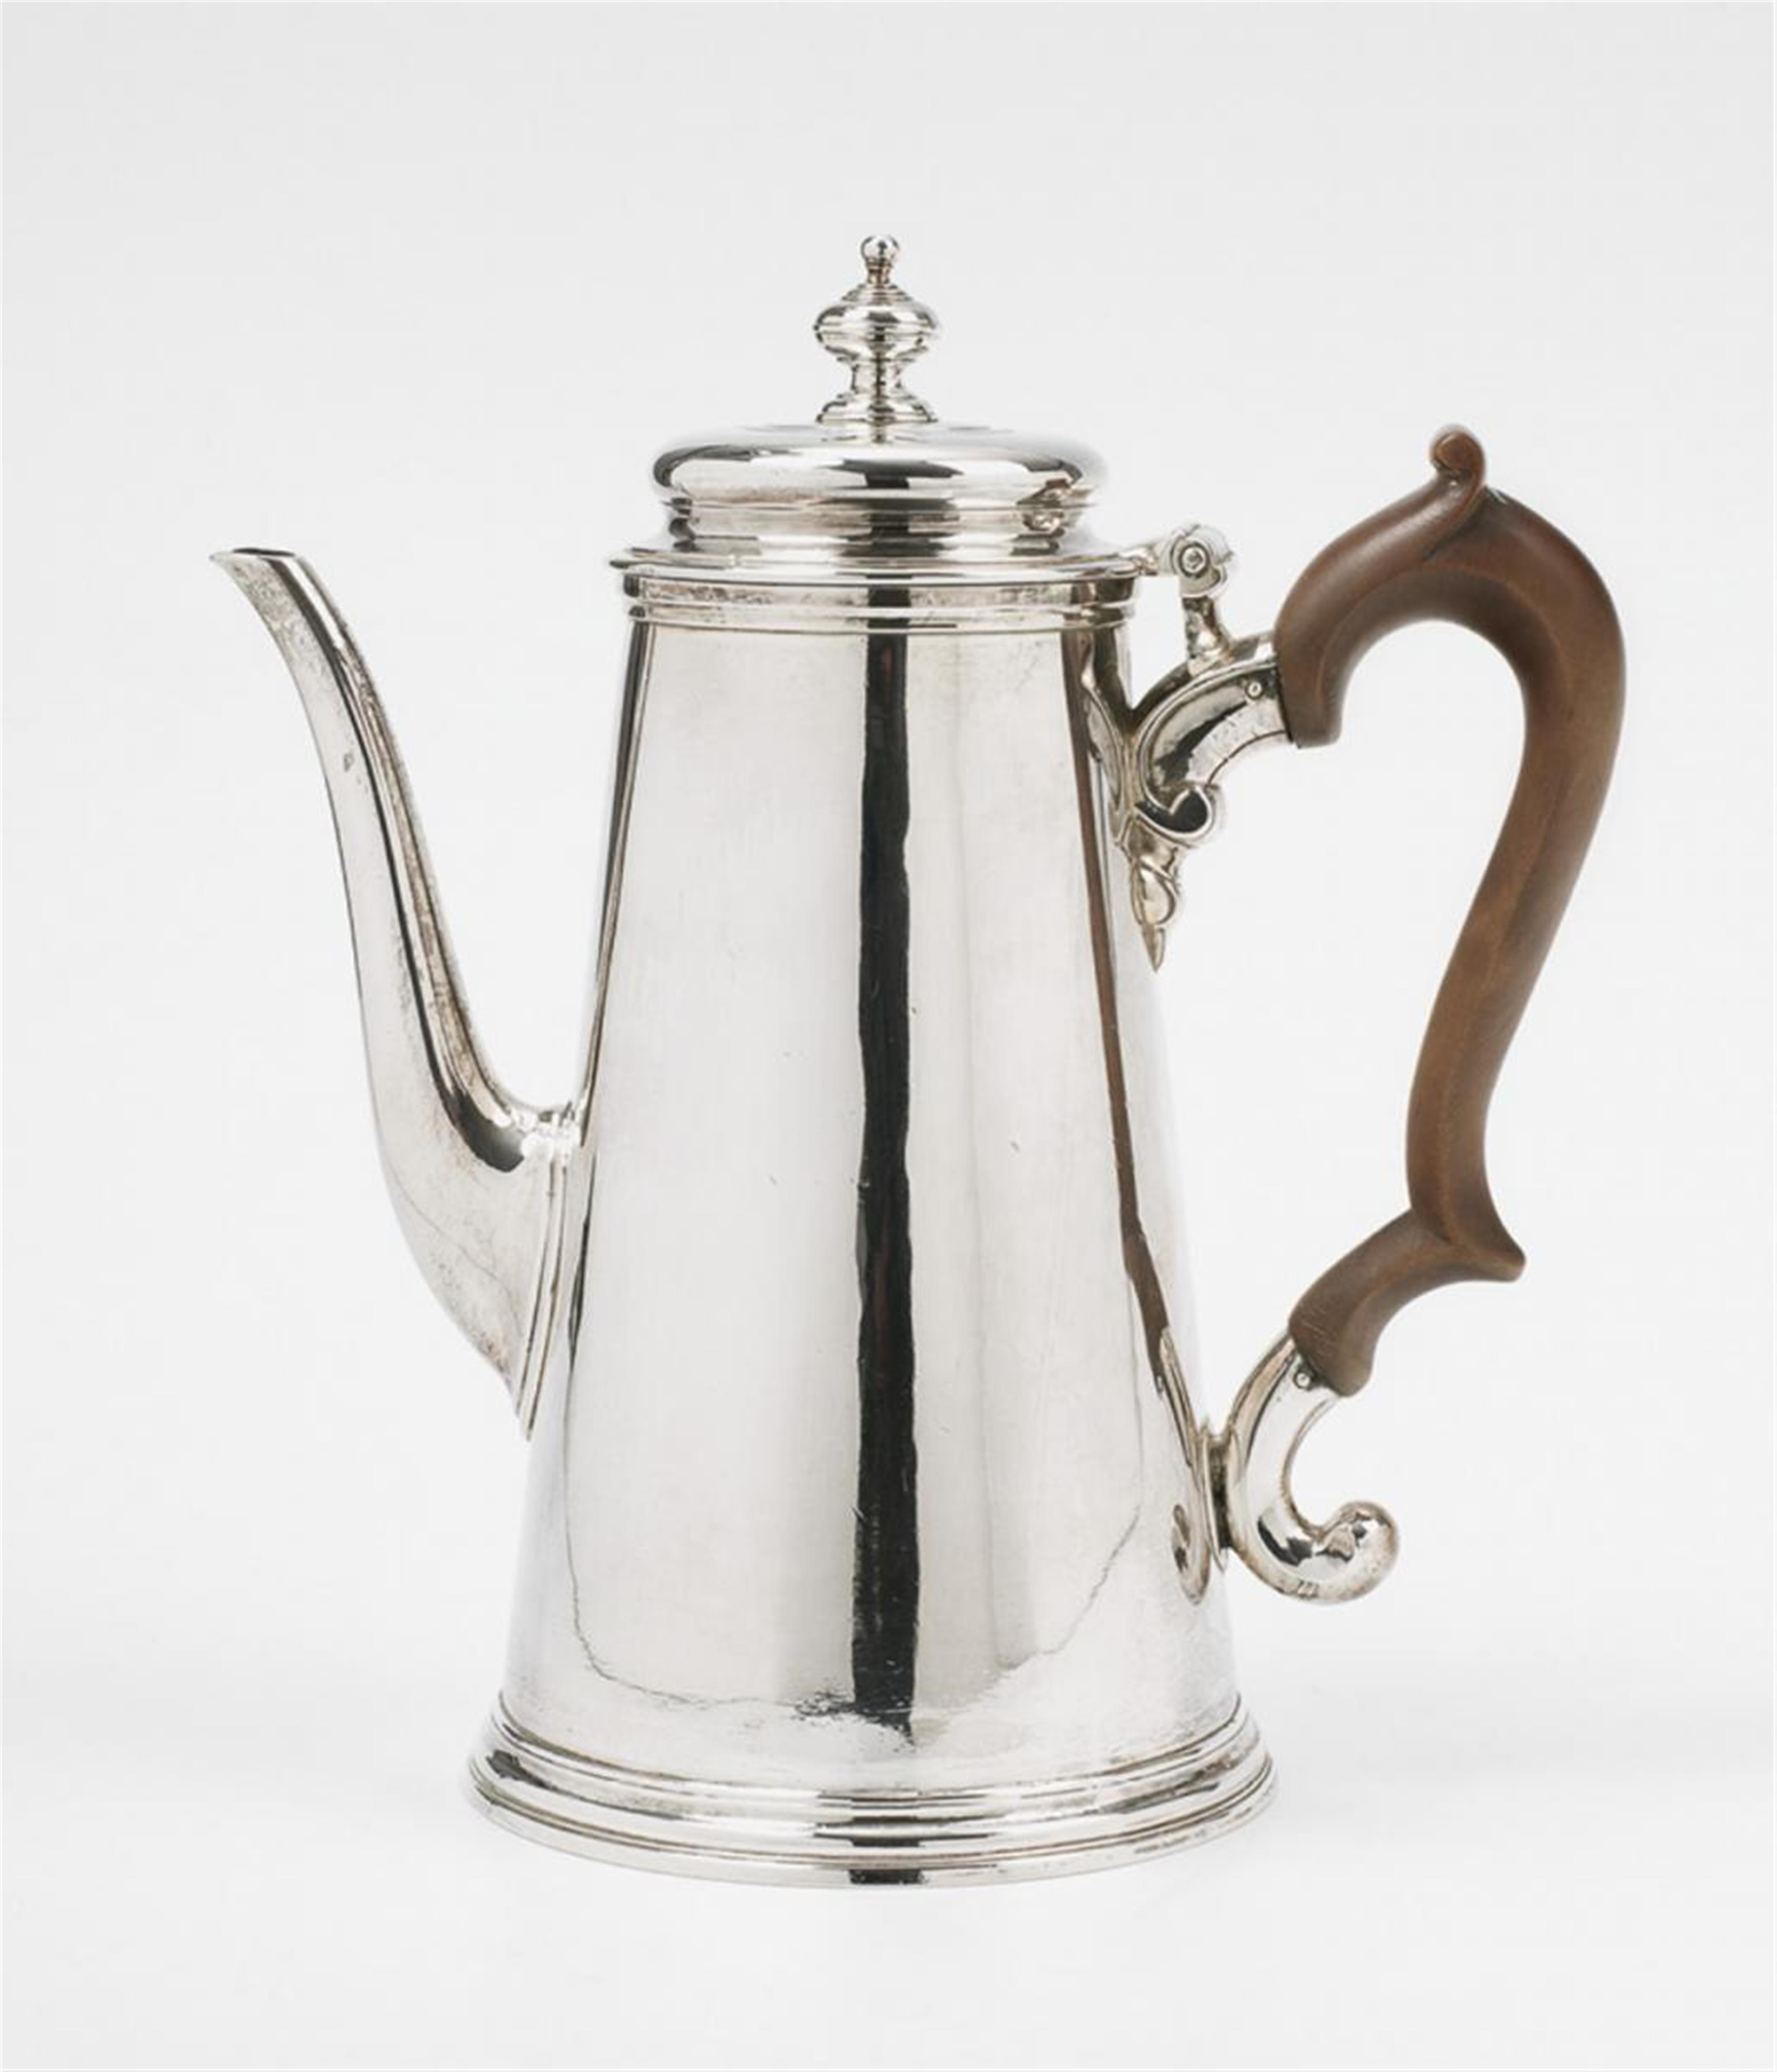 A George II silver coffee pot. Engraved with a coat-of-arms and motto 'SENECTUTEM OBLECTANT'. Marks of Benjamin Godfrey, London 1736. - image-2